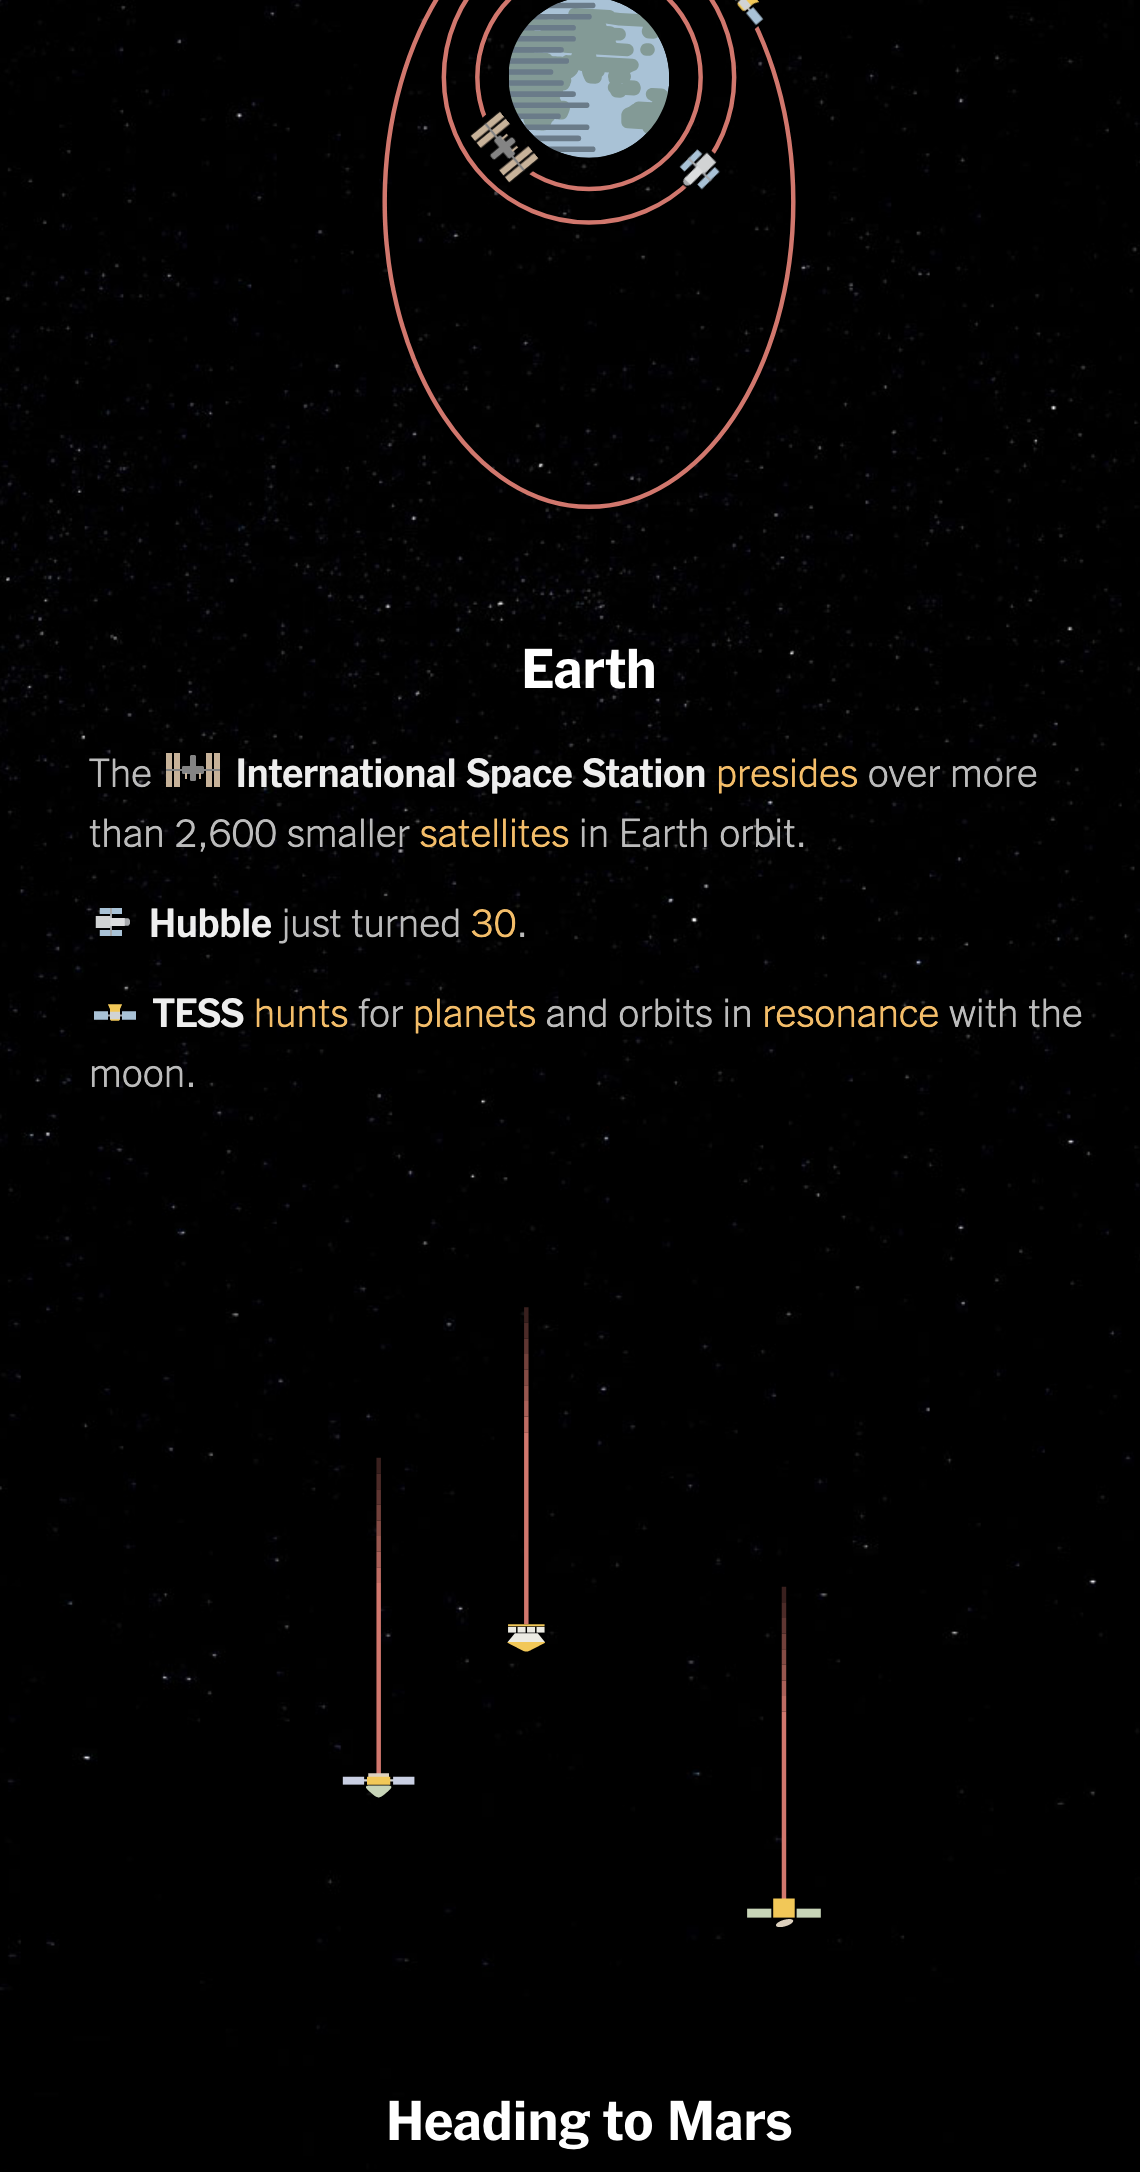 What spacecraft are in orbit of Earth and headed to Mars.